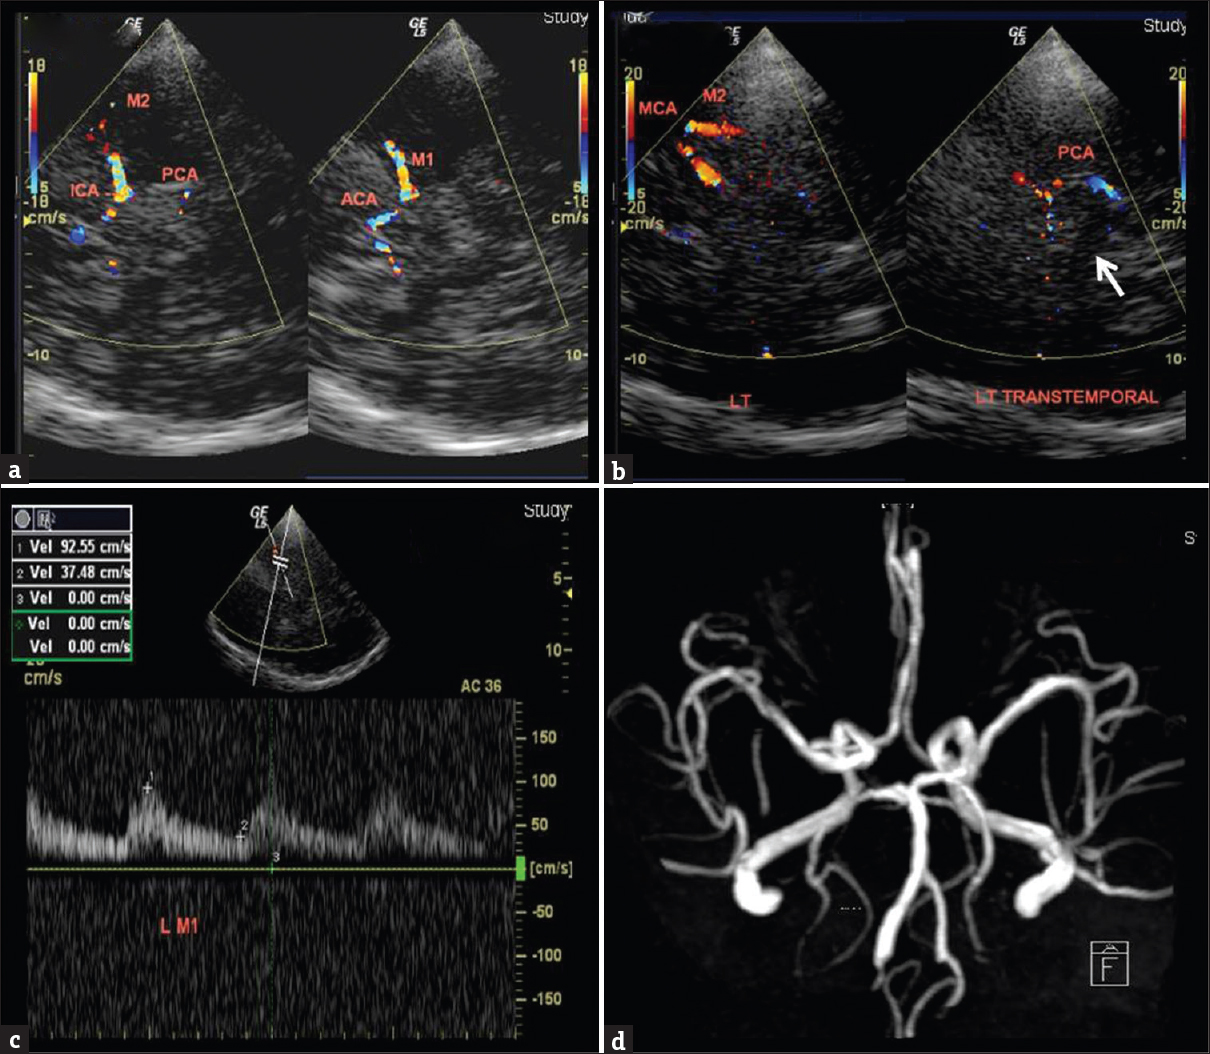 (a) A 65-year-old male with dementia and past stroke. Transcranial color-coded Doppler sonography, right transtemporal insonation demonstrates ipsilateral (dotted lines), M1 and M2 segments of middle cerebral artery, anterior cerebral artery on color display. A 53-year-old female with a history of recurrent stroke. (b) Transcranial color-coded Doppler sonography, left transtemporal insonation shows the normal middle cerebral artery on color display. Posterior cerebral artery is curving around the hypoechoic mesencephalon (white arrow). (c) Left middle cerebral artery spectral waveform shows normal peak systolic velocity and spectrum. (d) Magnetic resonance angiogram showing a normal circle of Willis.